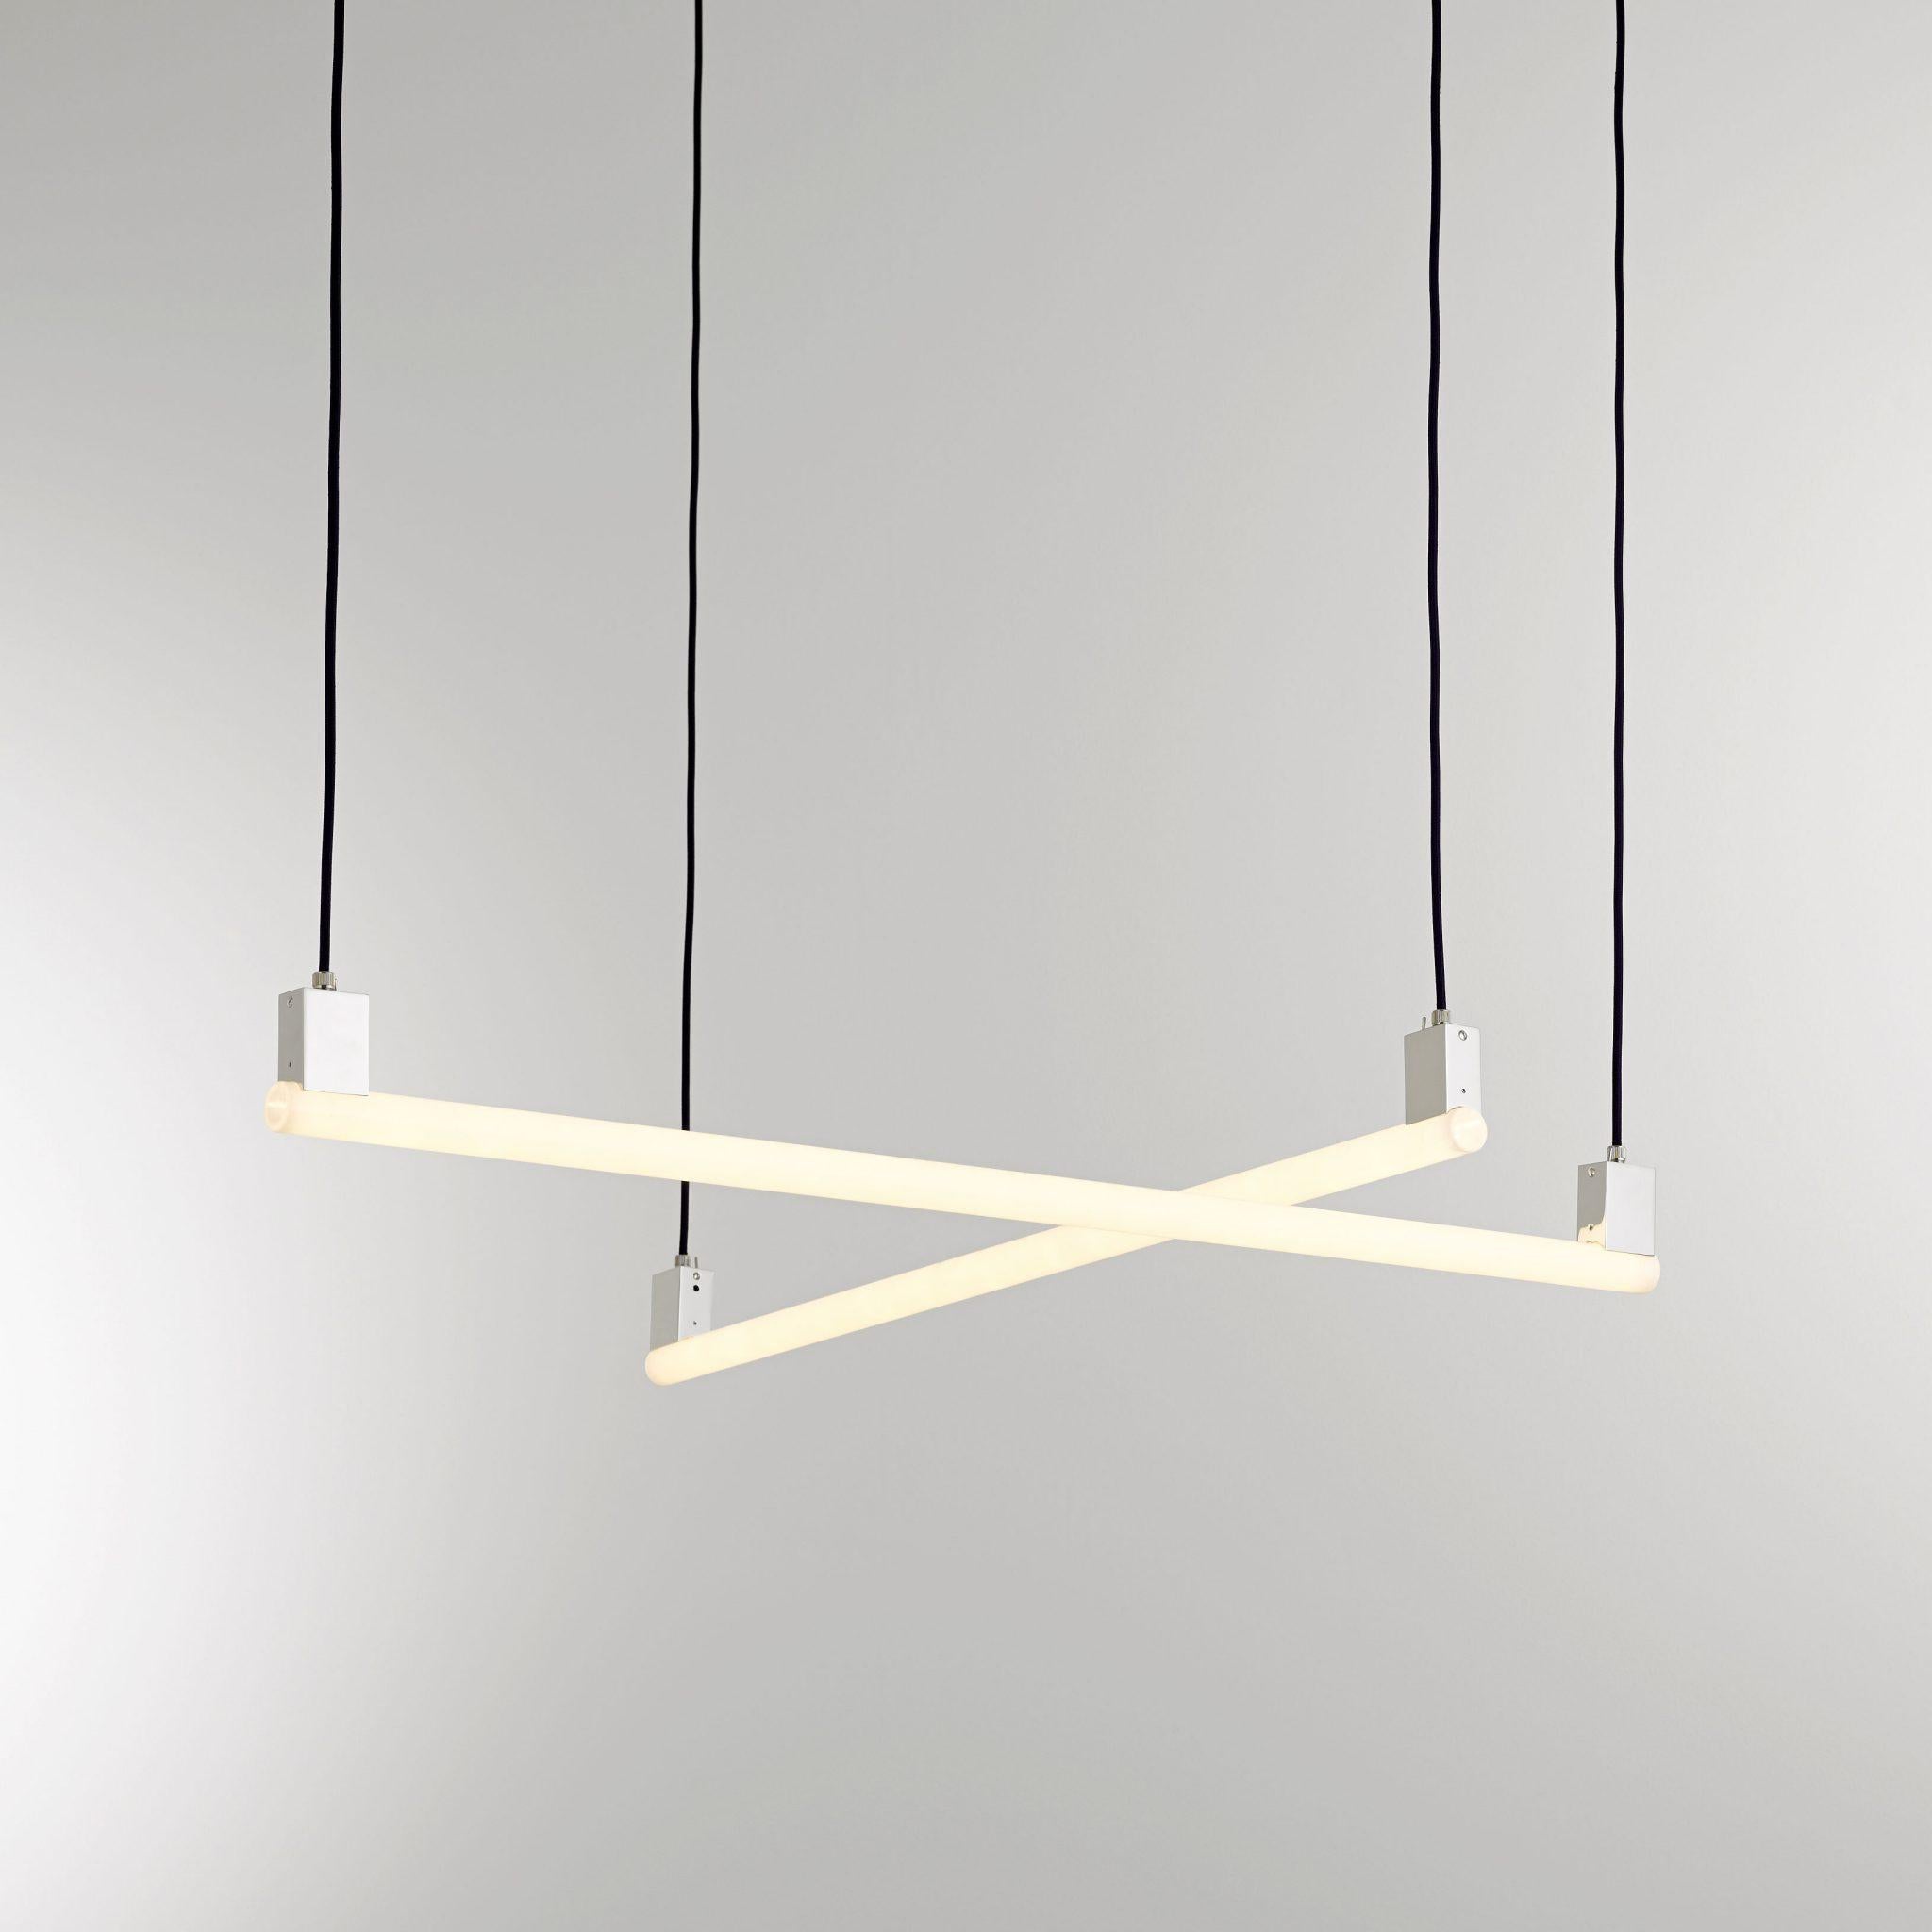 Mea suspension 100 by Kaia
Dimensions: 100 x 8 x 2.9 cm
Linear opal LED S14s*, 15W, 2700 K, 
Mains( Phase) dimmable, 1000 lm
Materials: Brushed brass, Acrylic 

Also available: Polished nickel, brushed nickel, patinated brass, blackened brass,